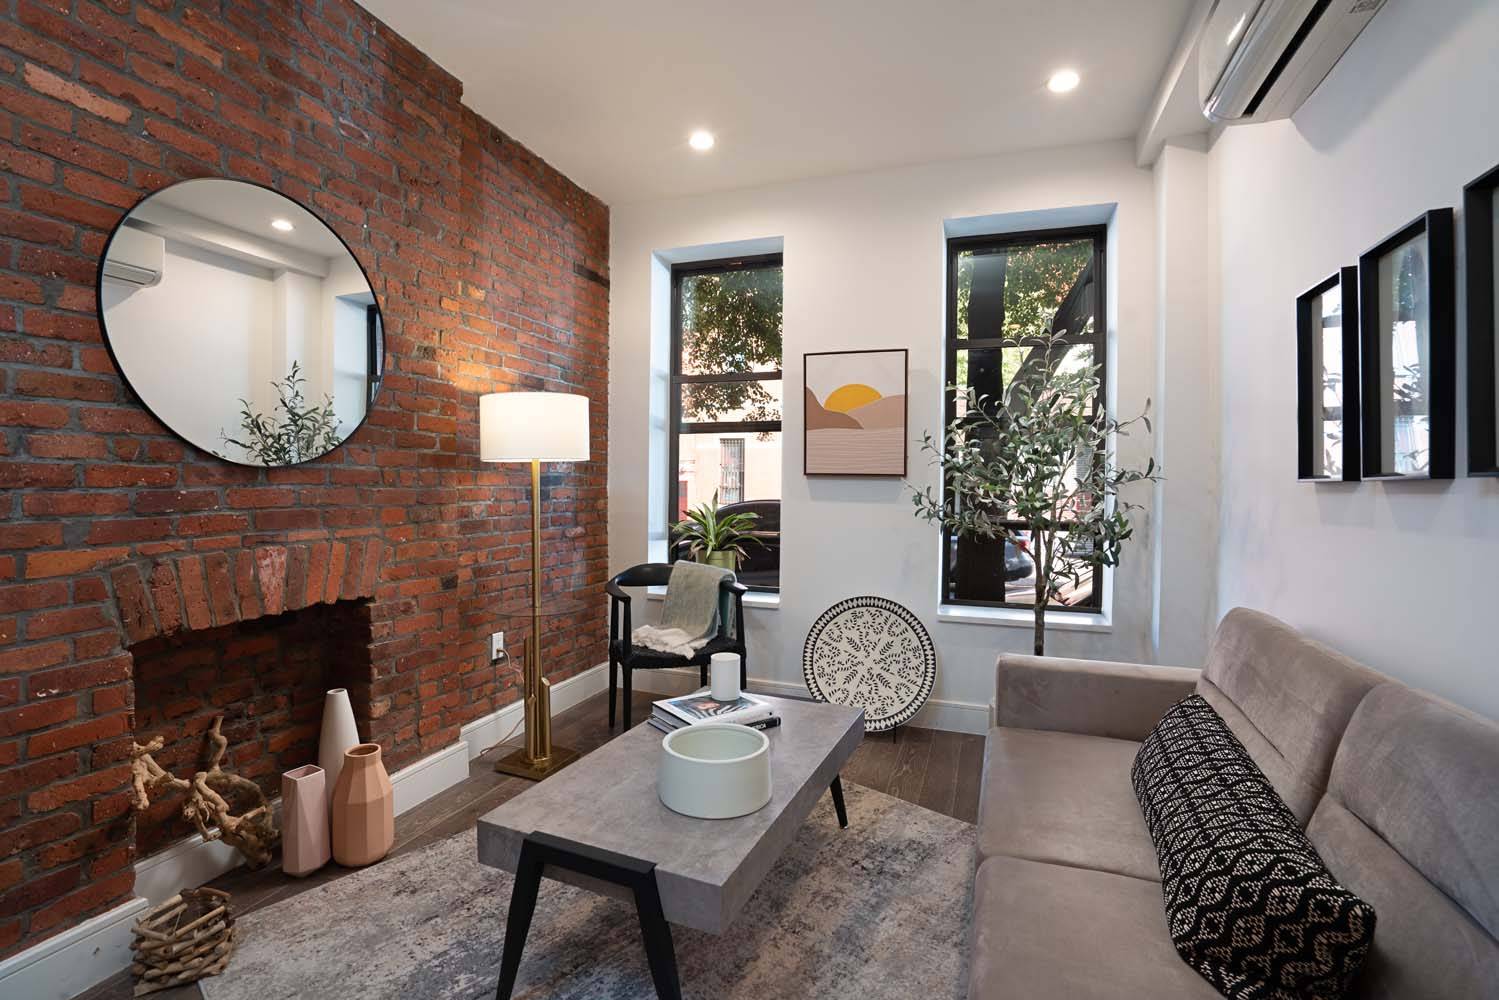 Welcome to 66 Steuben. A collection of 6 condos in the heart of Clinton Hill.